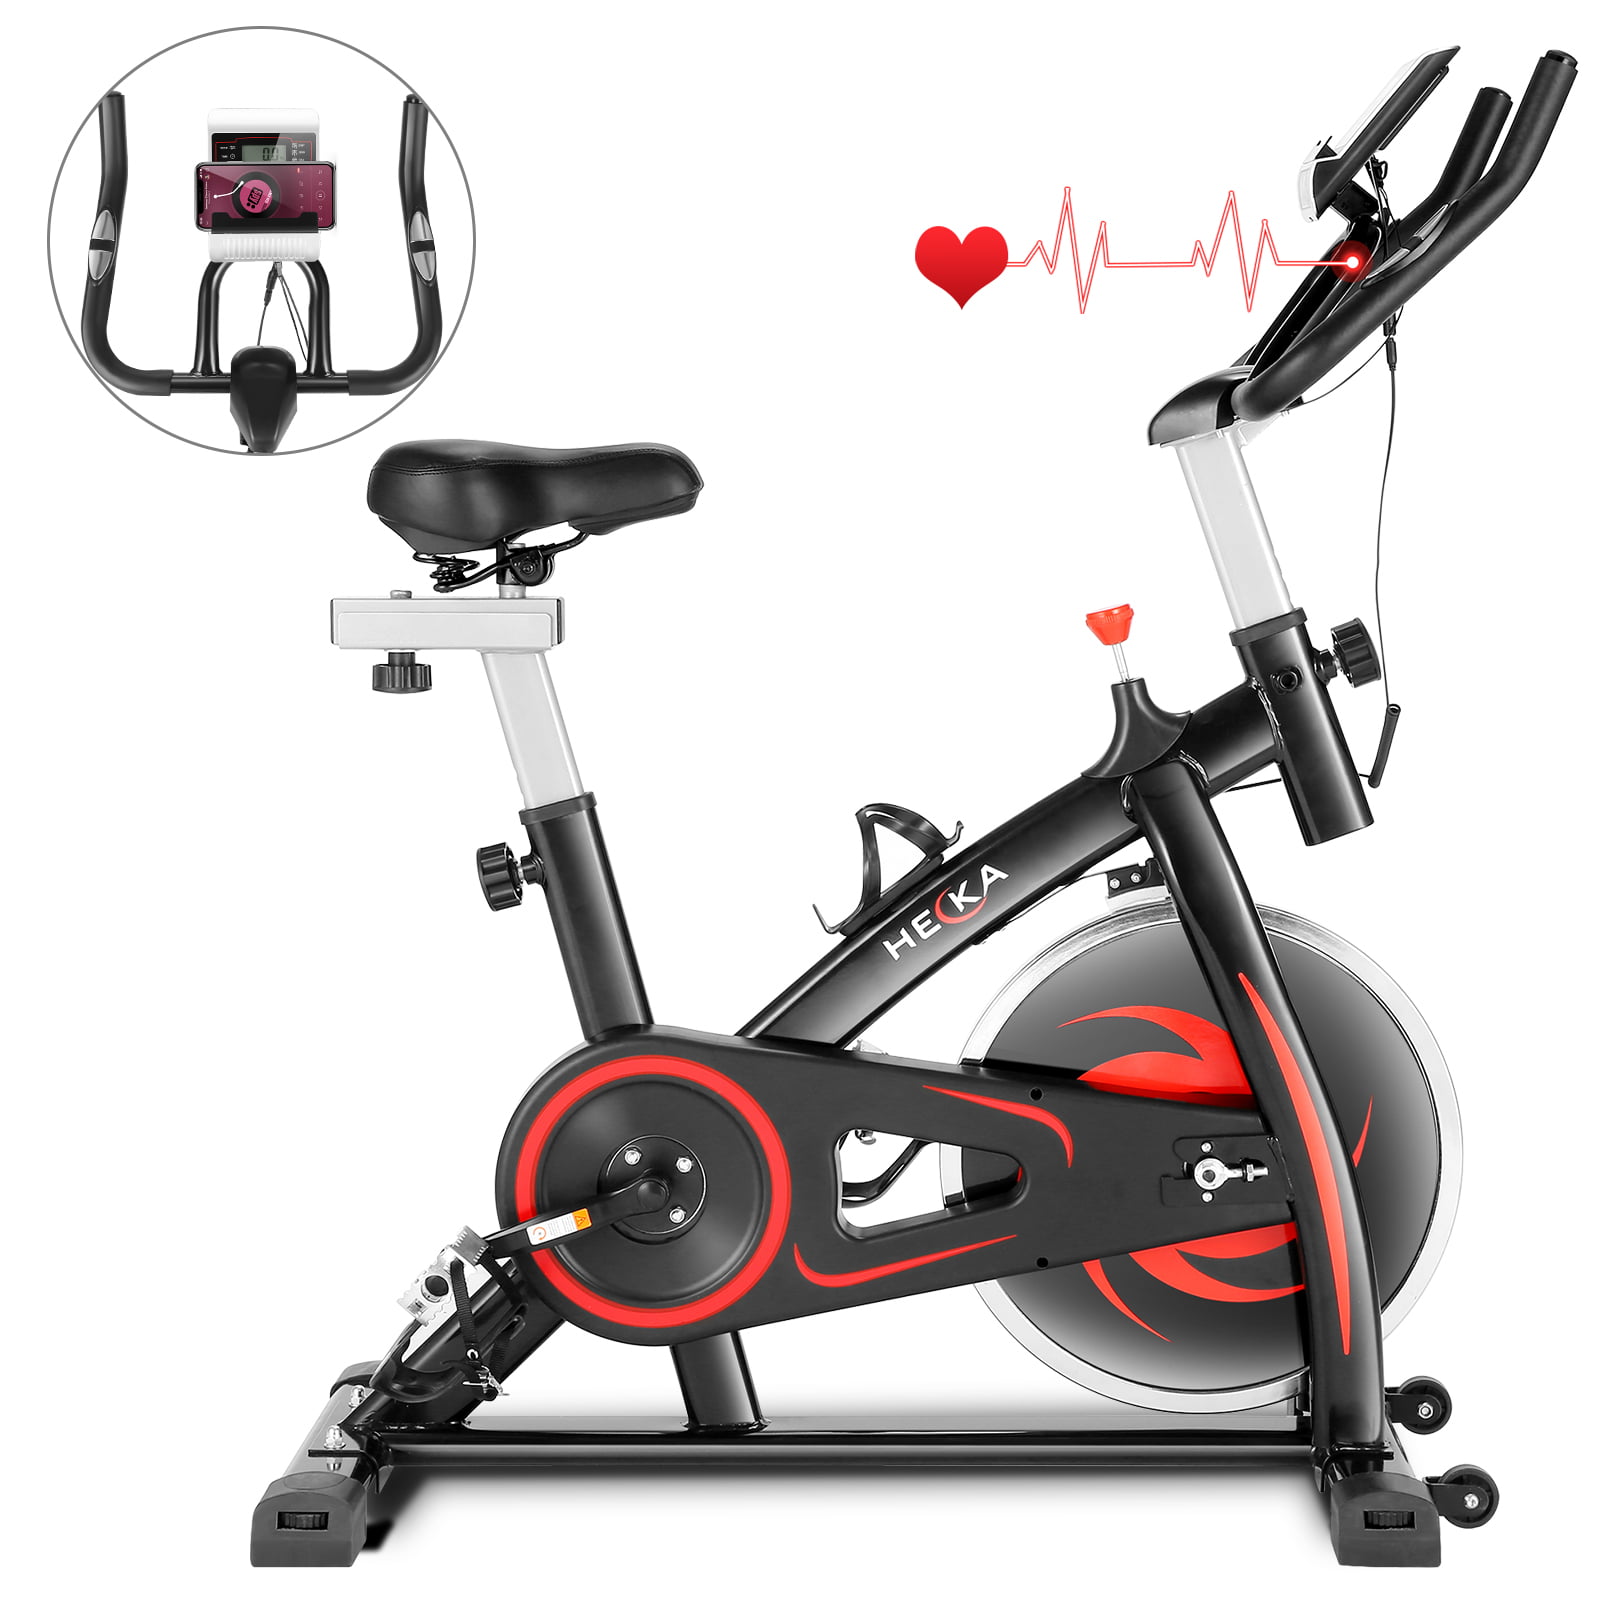 Details about   HEKA Exercise Bike Indoor Stationary Cycle LCD Display Home Cardio Workout 